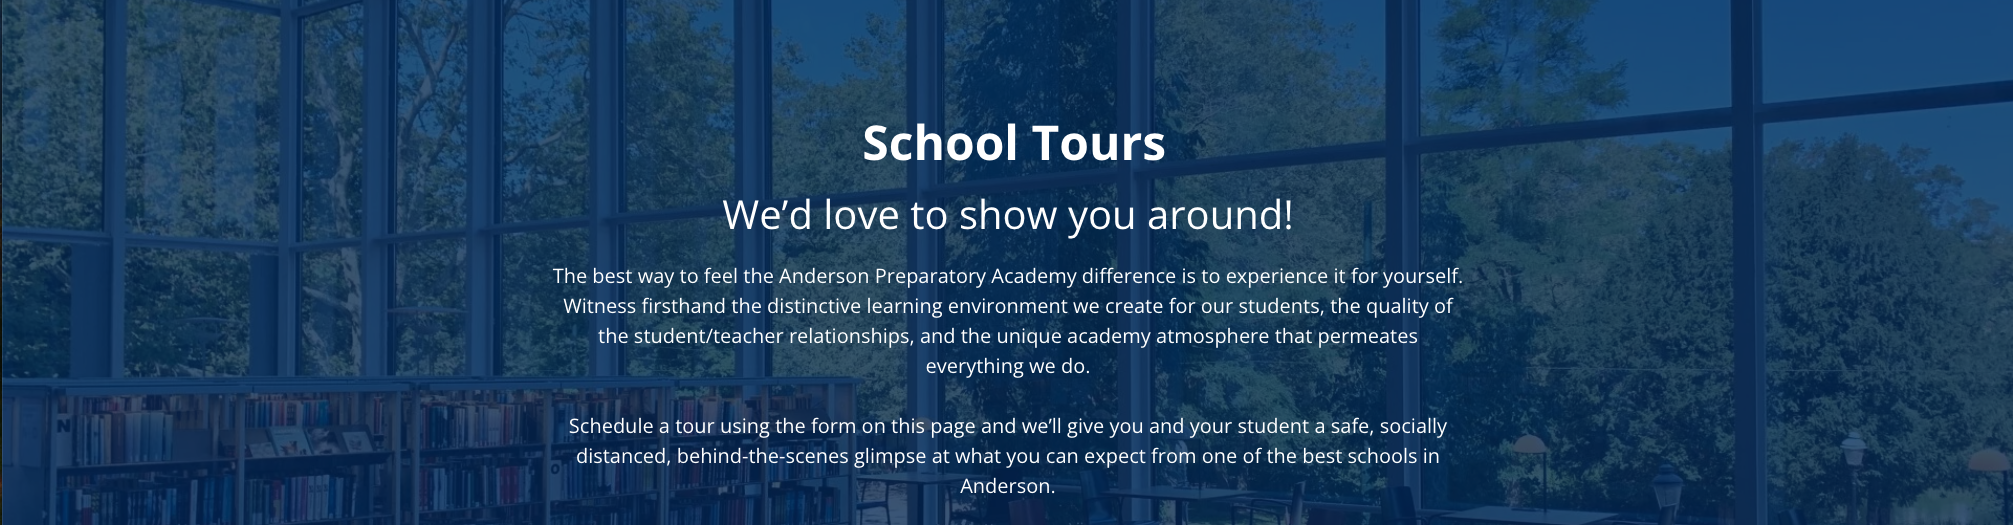 School Tours We’d love to show you around! The best way to feel the Anderson Preparatory Academy difference is to experience it for yourself. Witness firsthand the distinctive learning environment we create for our students, the quality of the student/teacher relationships, and the unique academy atmosphere that permeates everything we do.    Schedule a tour using the form on this page and we’ll give you and your student a safe, socially distanced, behind-the-scenes glimpse at what you can expect from one of the best schools in Anderson.